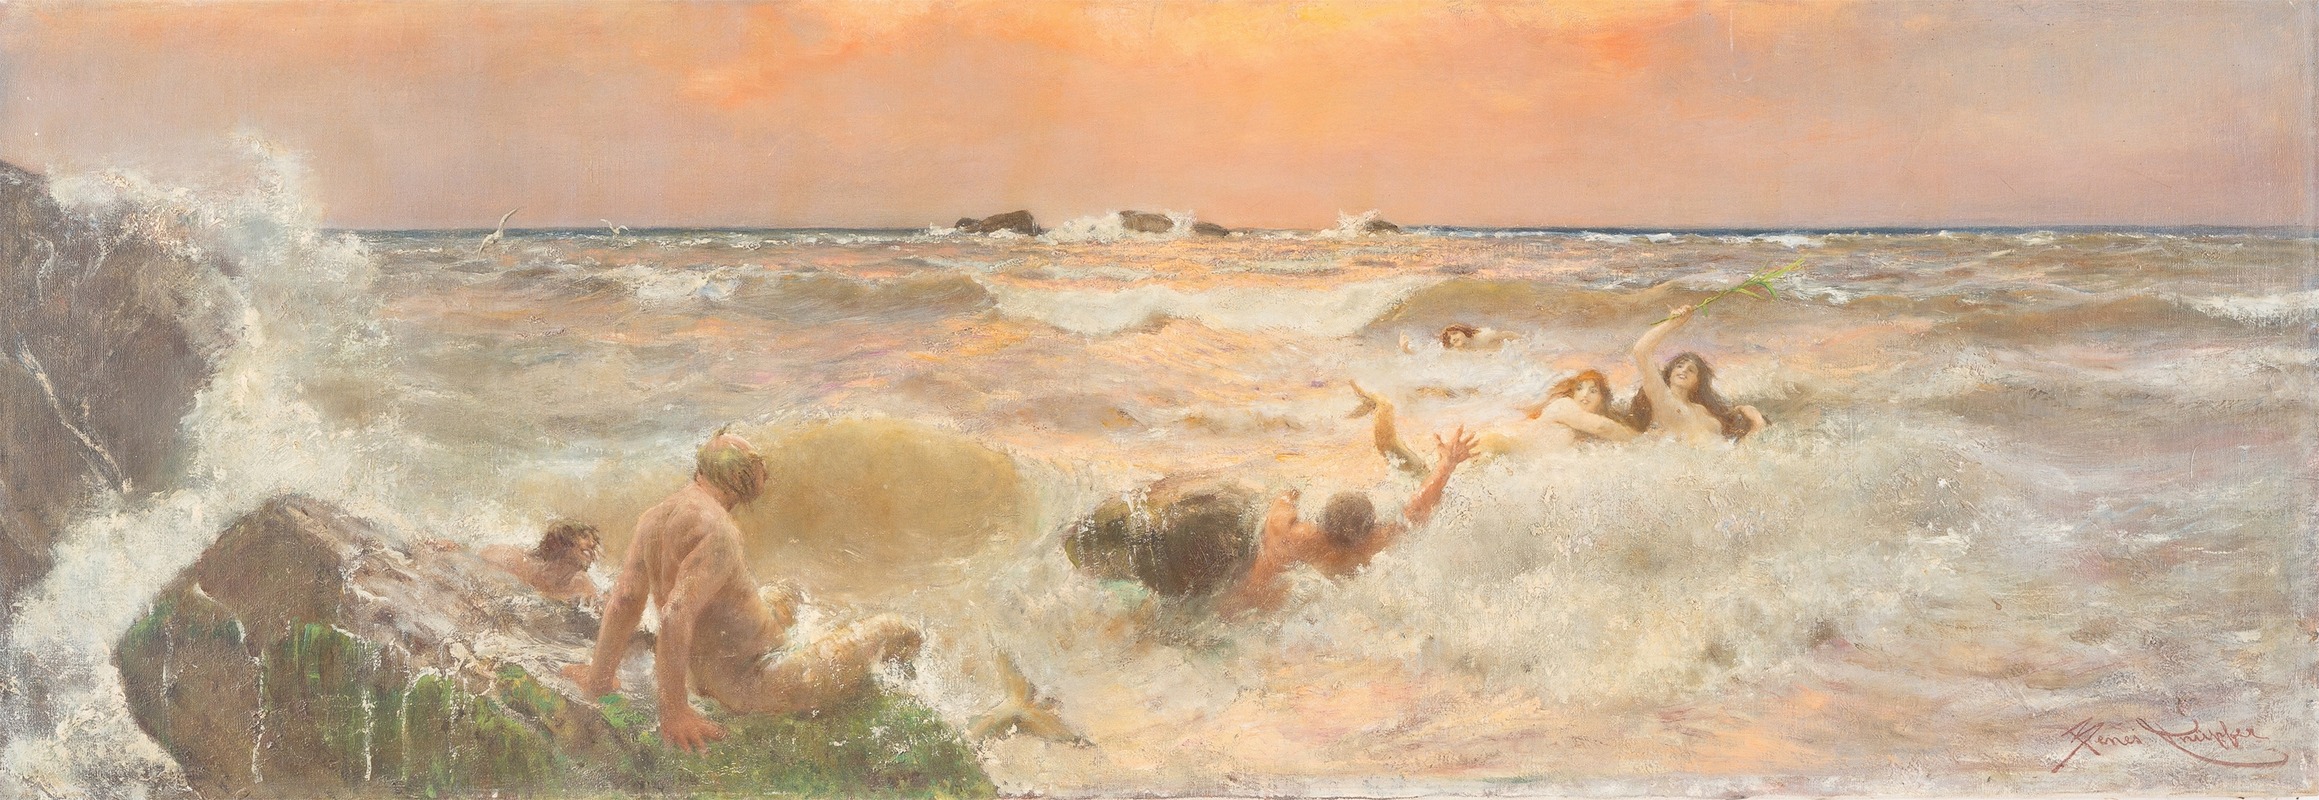 Benes Knüpfer - Mermaids frolicking in the sea at sunset